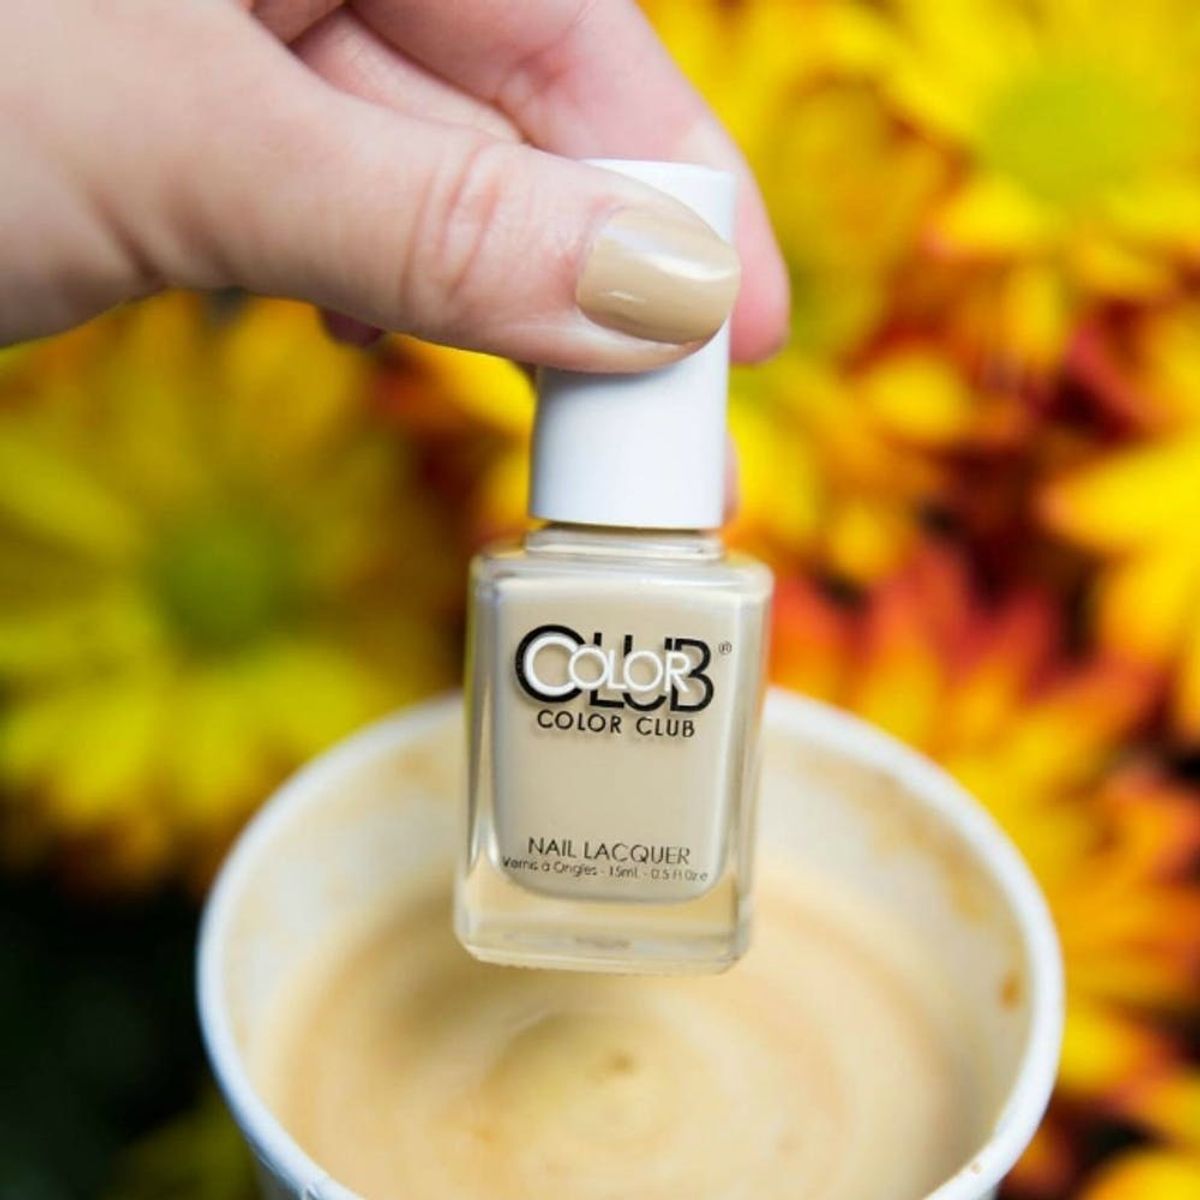 PSL-Scented Nail Polish Is Actually a Thing